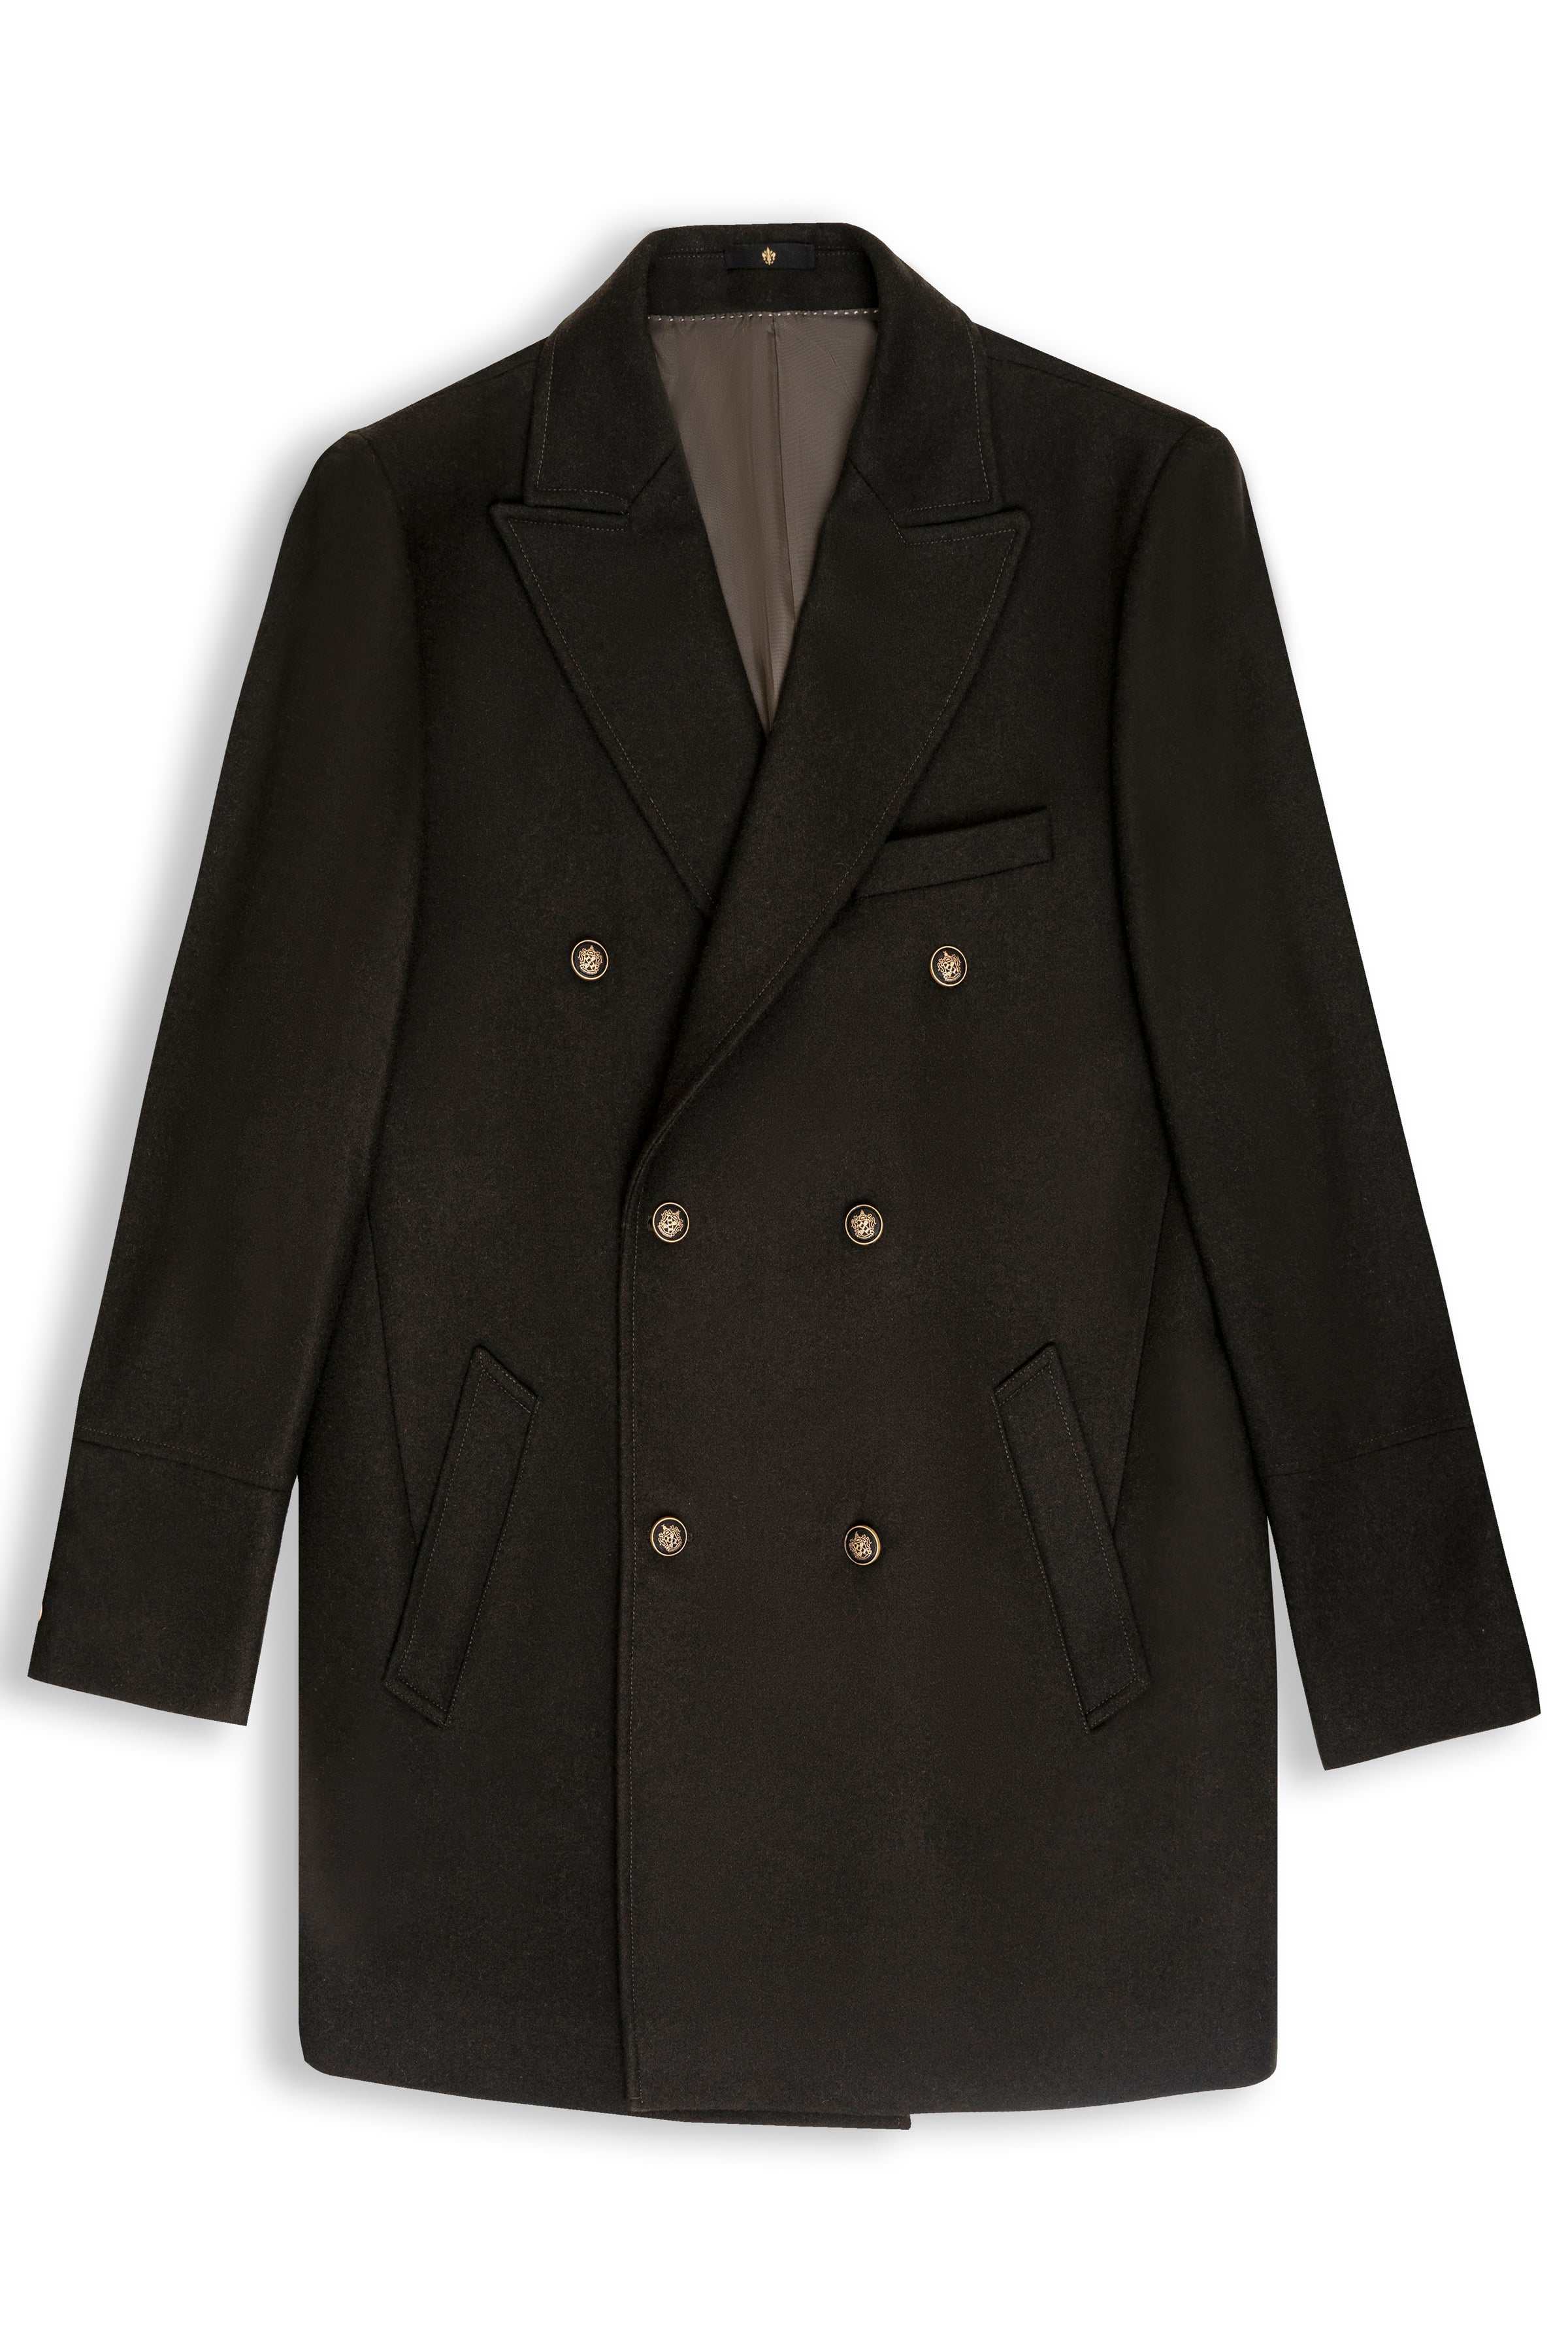 WOOLEN LONG COAT DOUBLE BREASTED DARK OLIVE at Charcoal Clothing